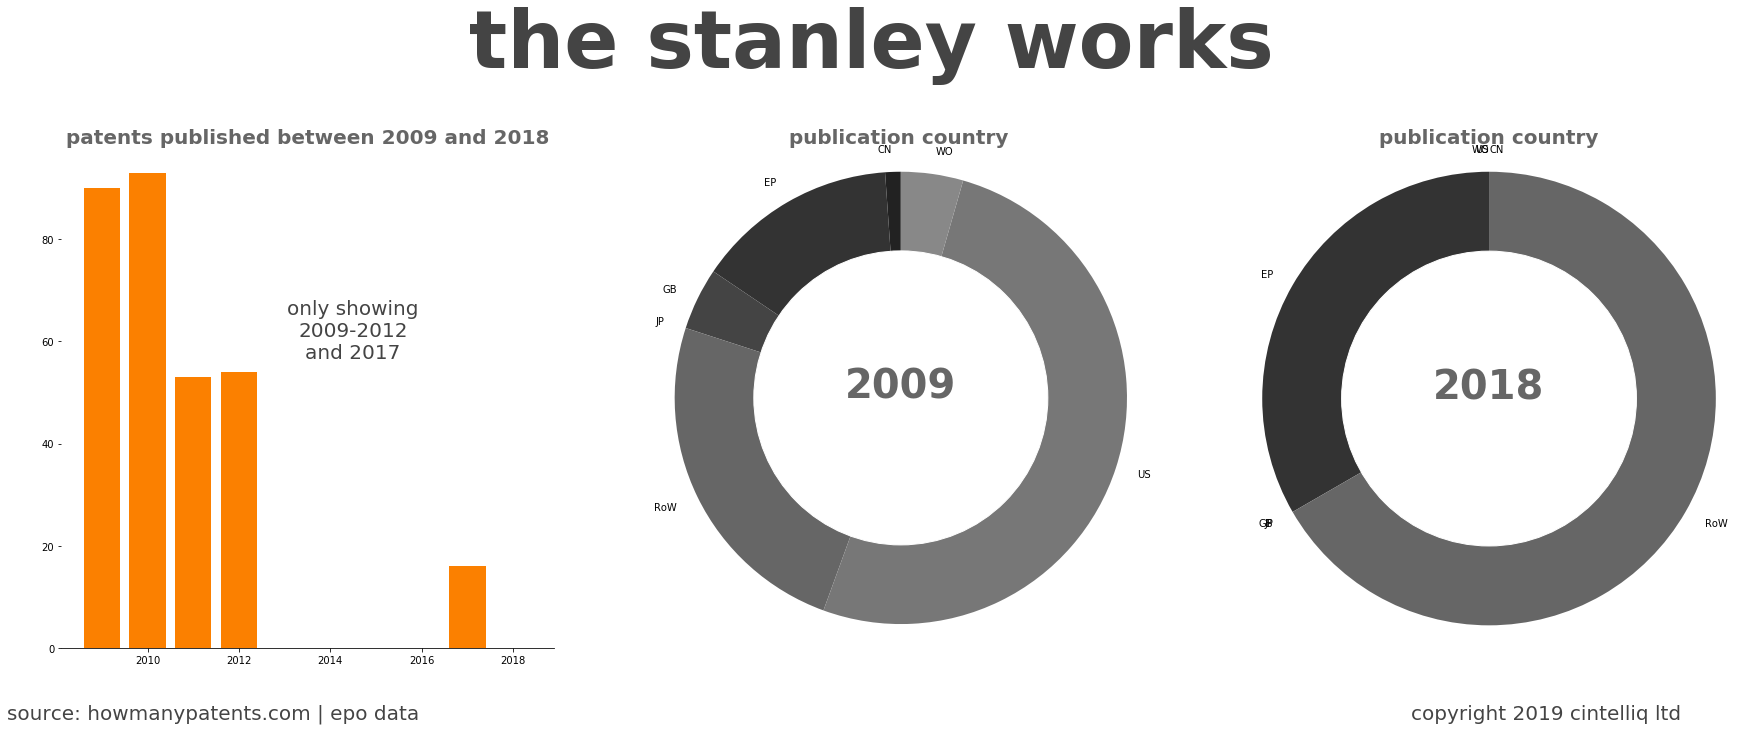 summary of patents for The Stanley Works